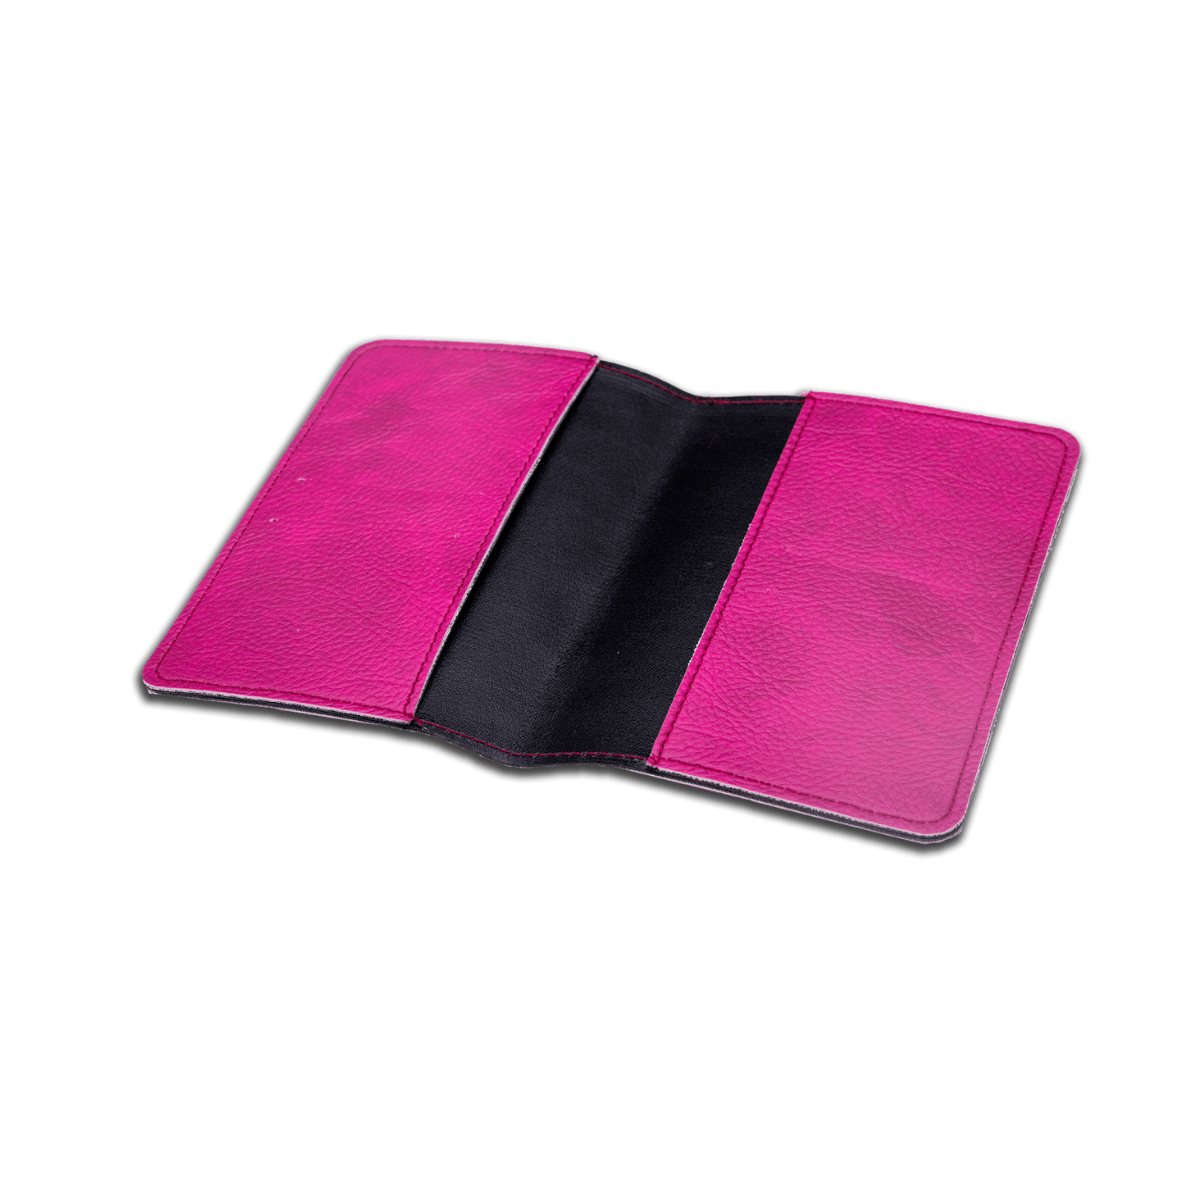 Personalized Passport Cover without Strap